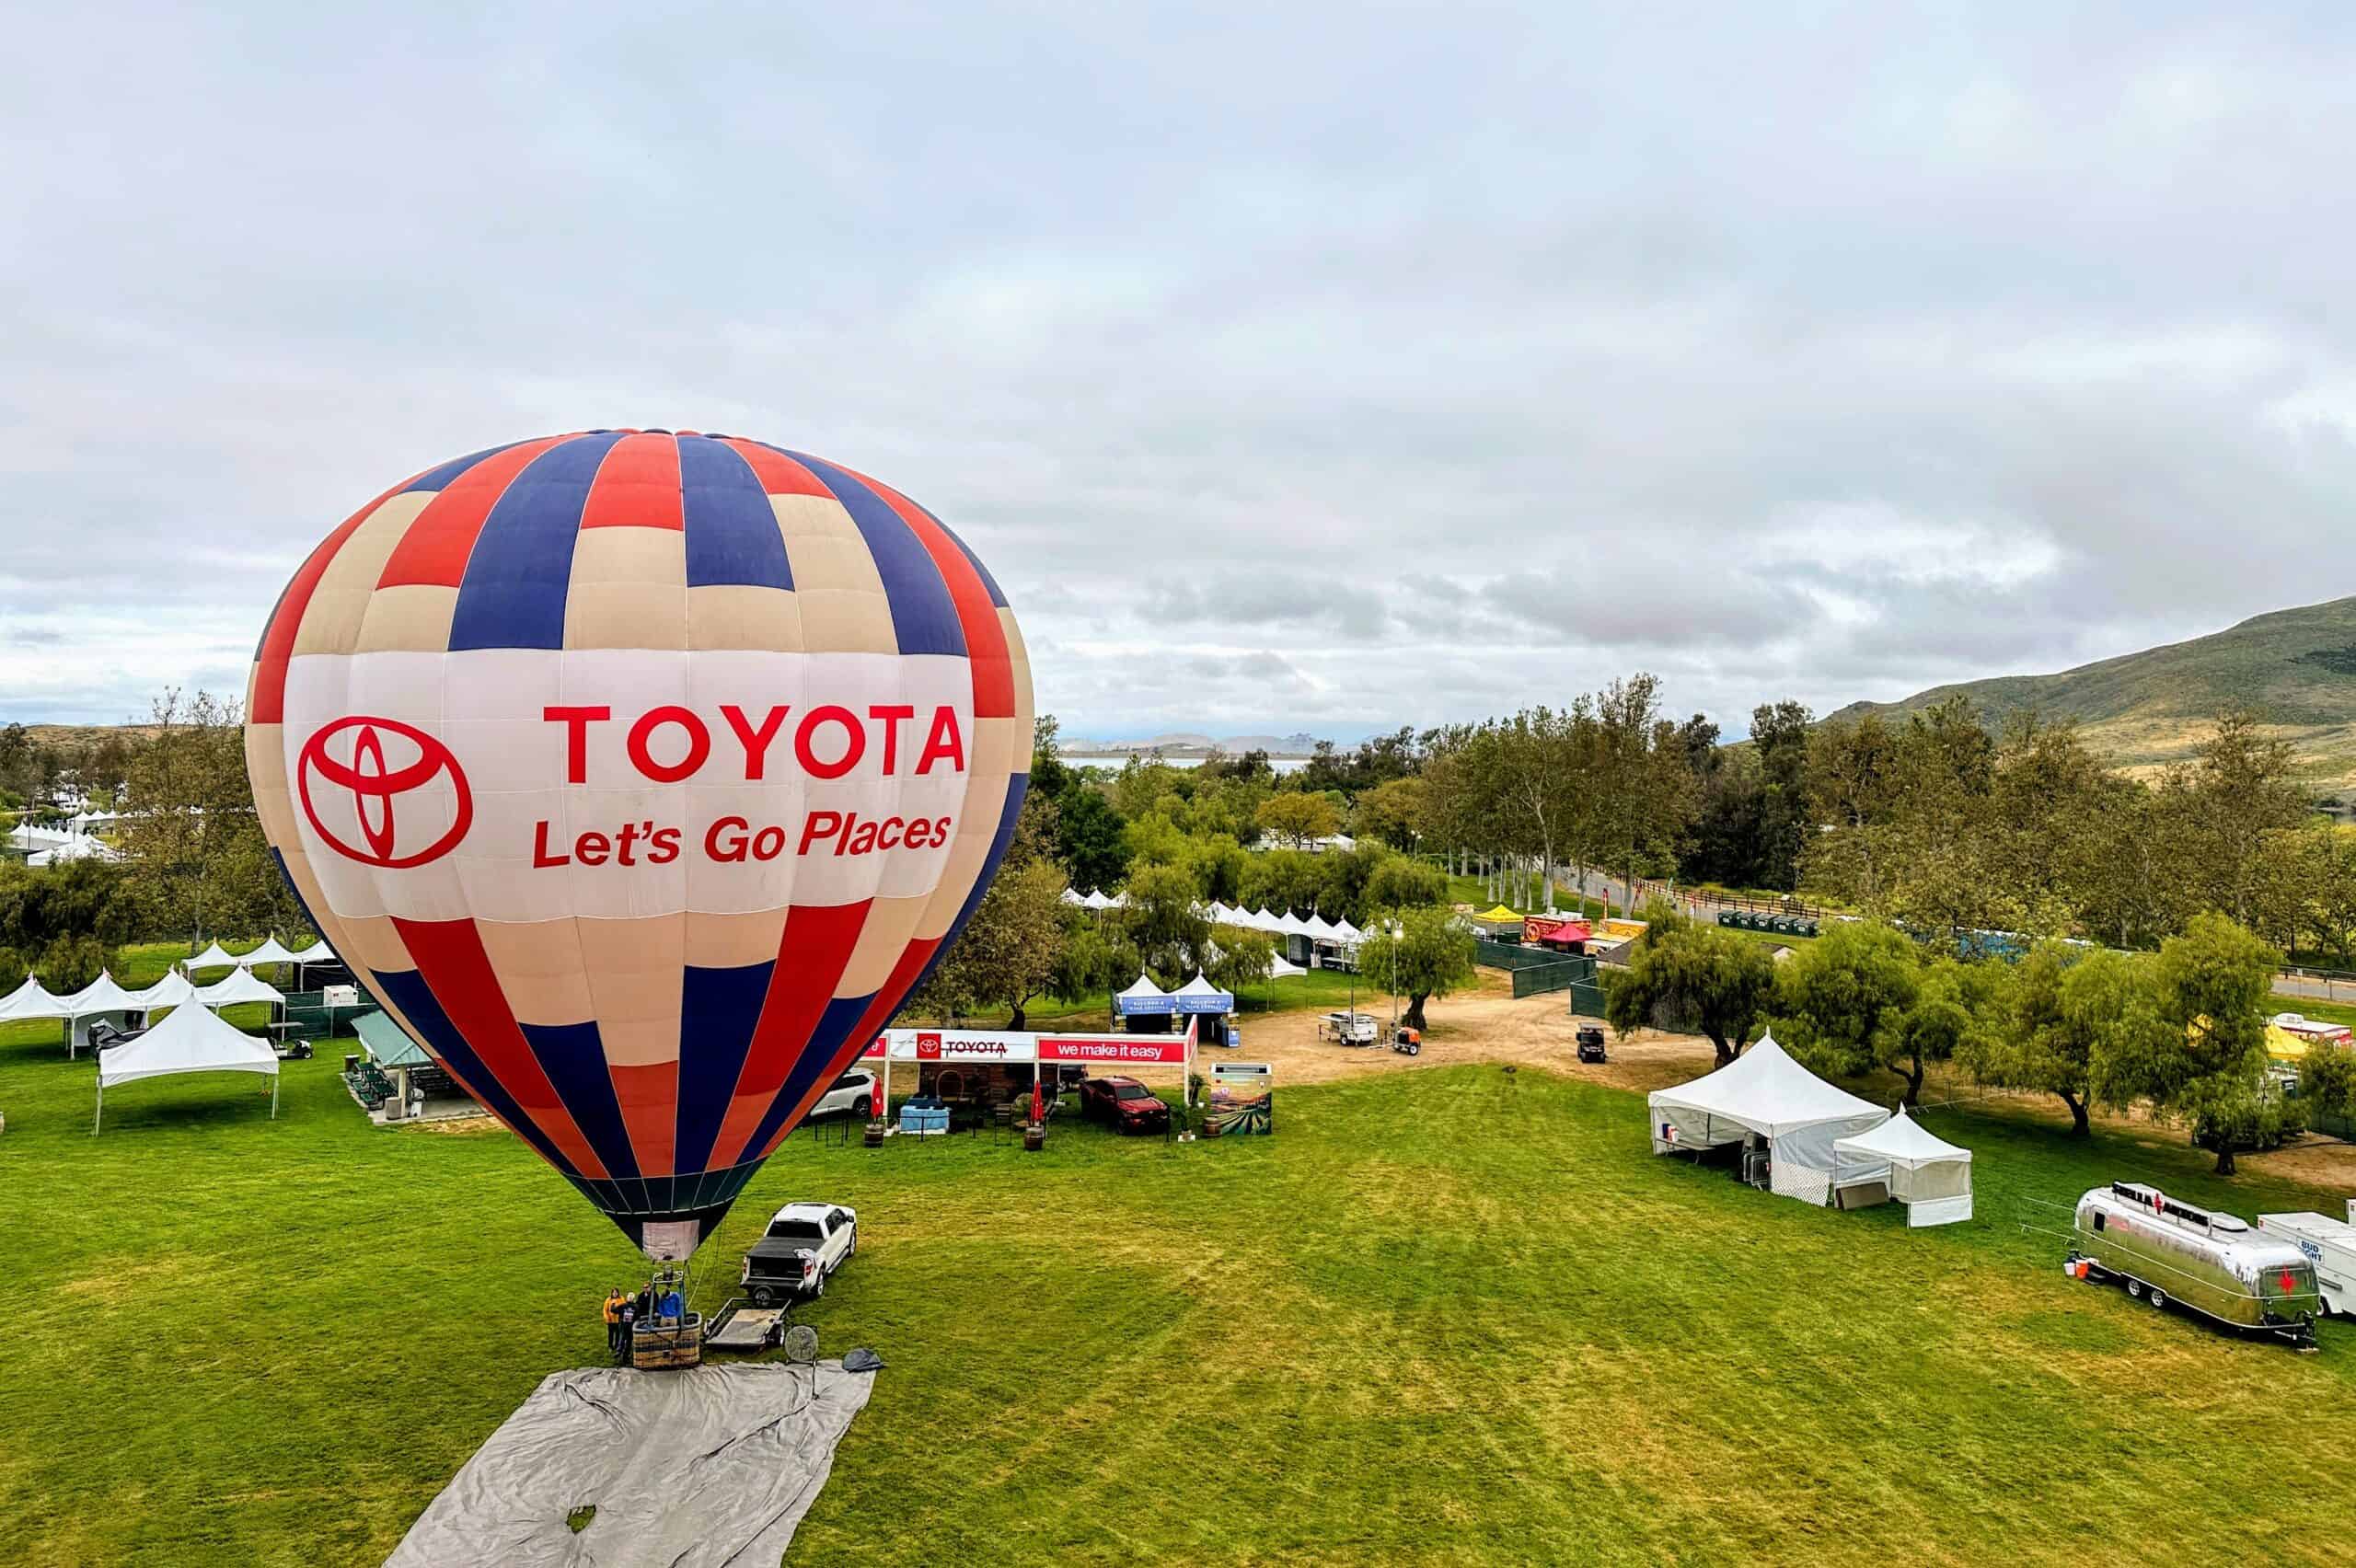 Wine Festival, California Style: Hot Air Balloons, Wineries & Live Music